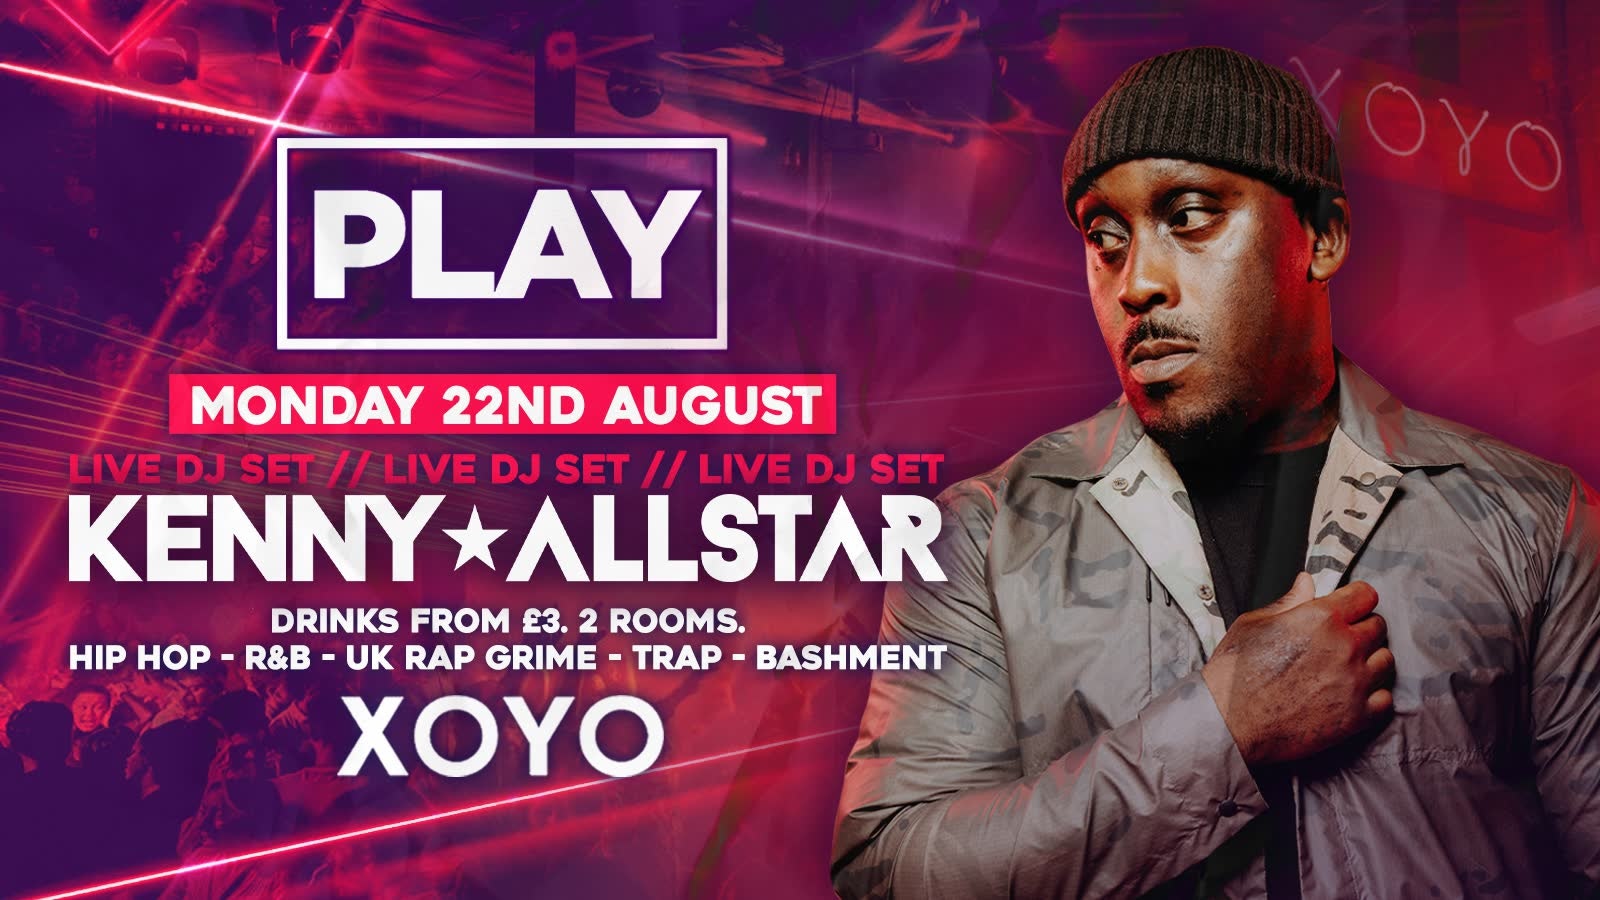 Play @ XOYO – Kenny Allstar Live! ⚠️ THIS EVENT WILL SELL OUT ⚠️